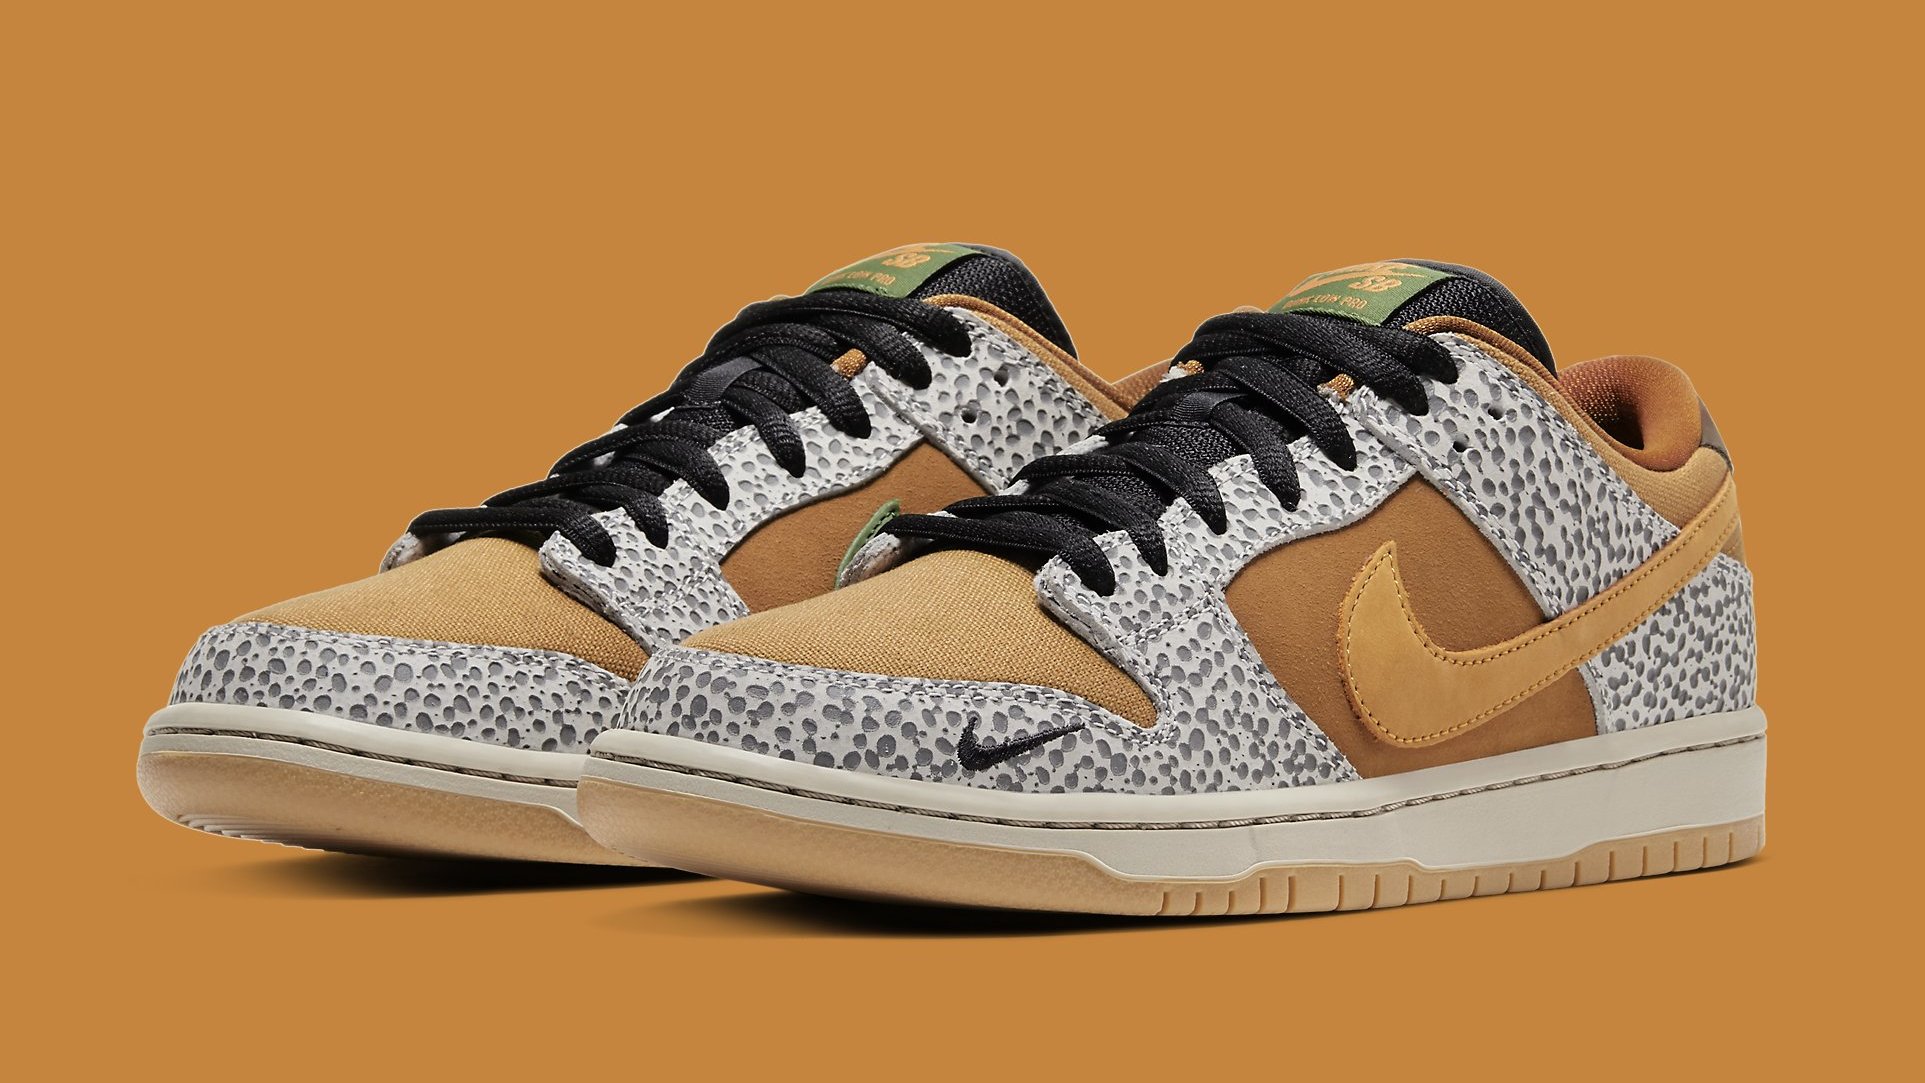 Best Look Yet at the 'Safari' Nike SB Dunk Low | Complex